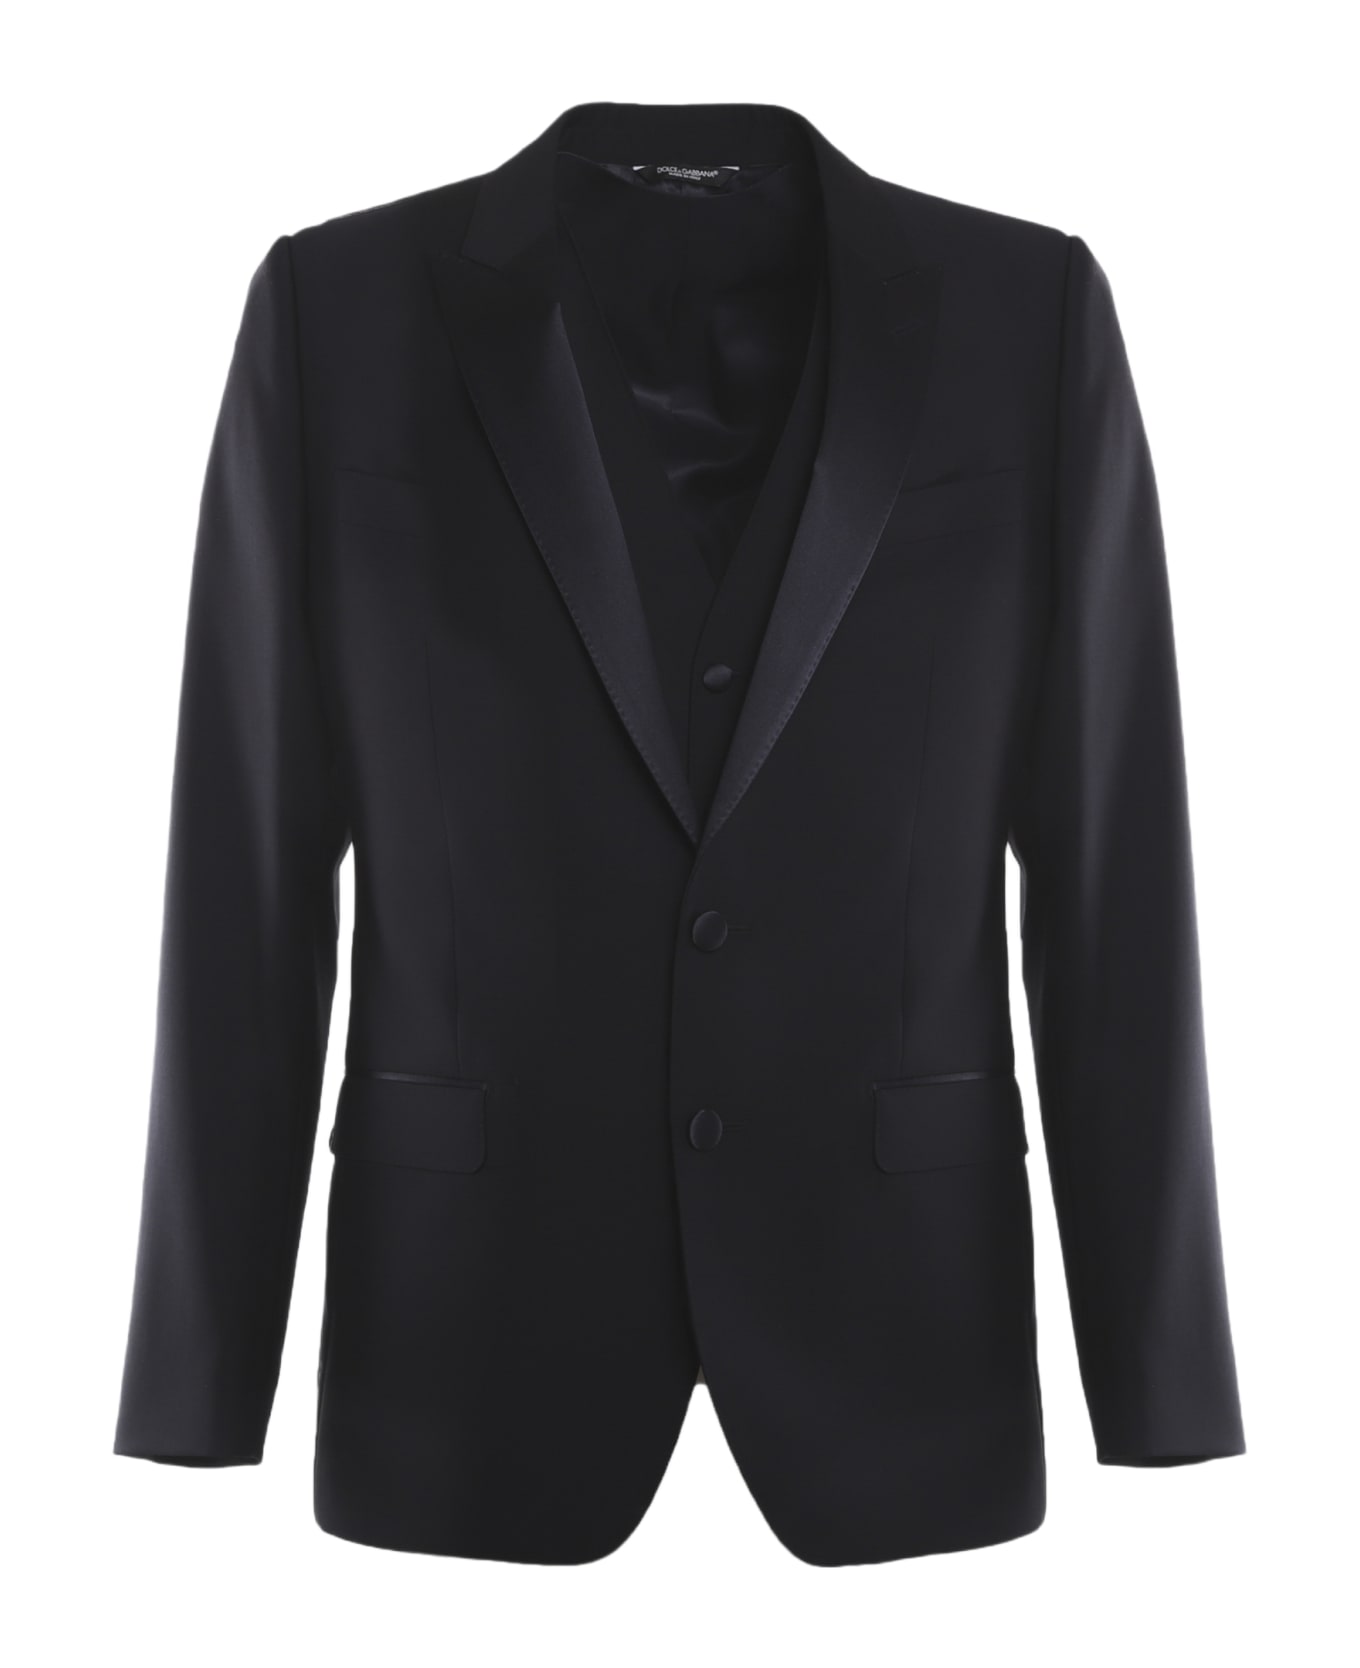 Dolce & Gabbana Suit Made Of Virgin Wool With Silk Inserts - Blue スーツ